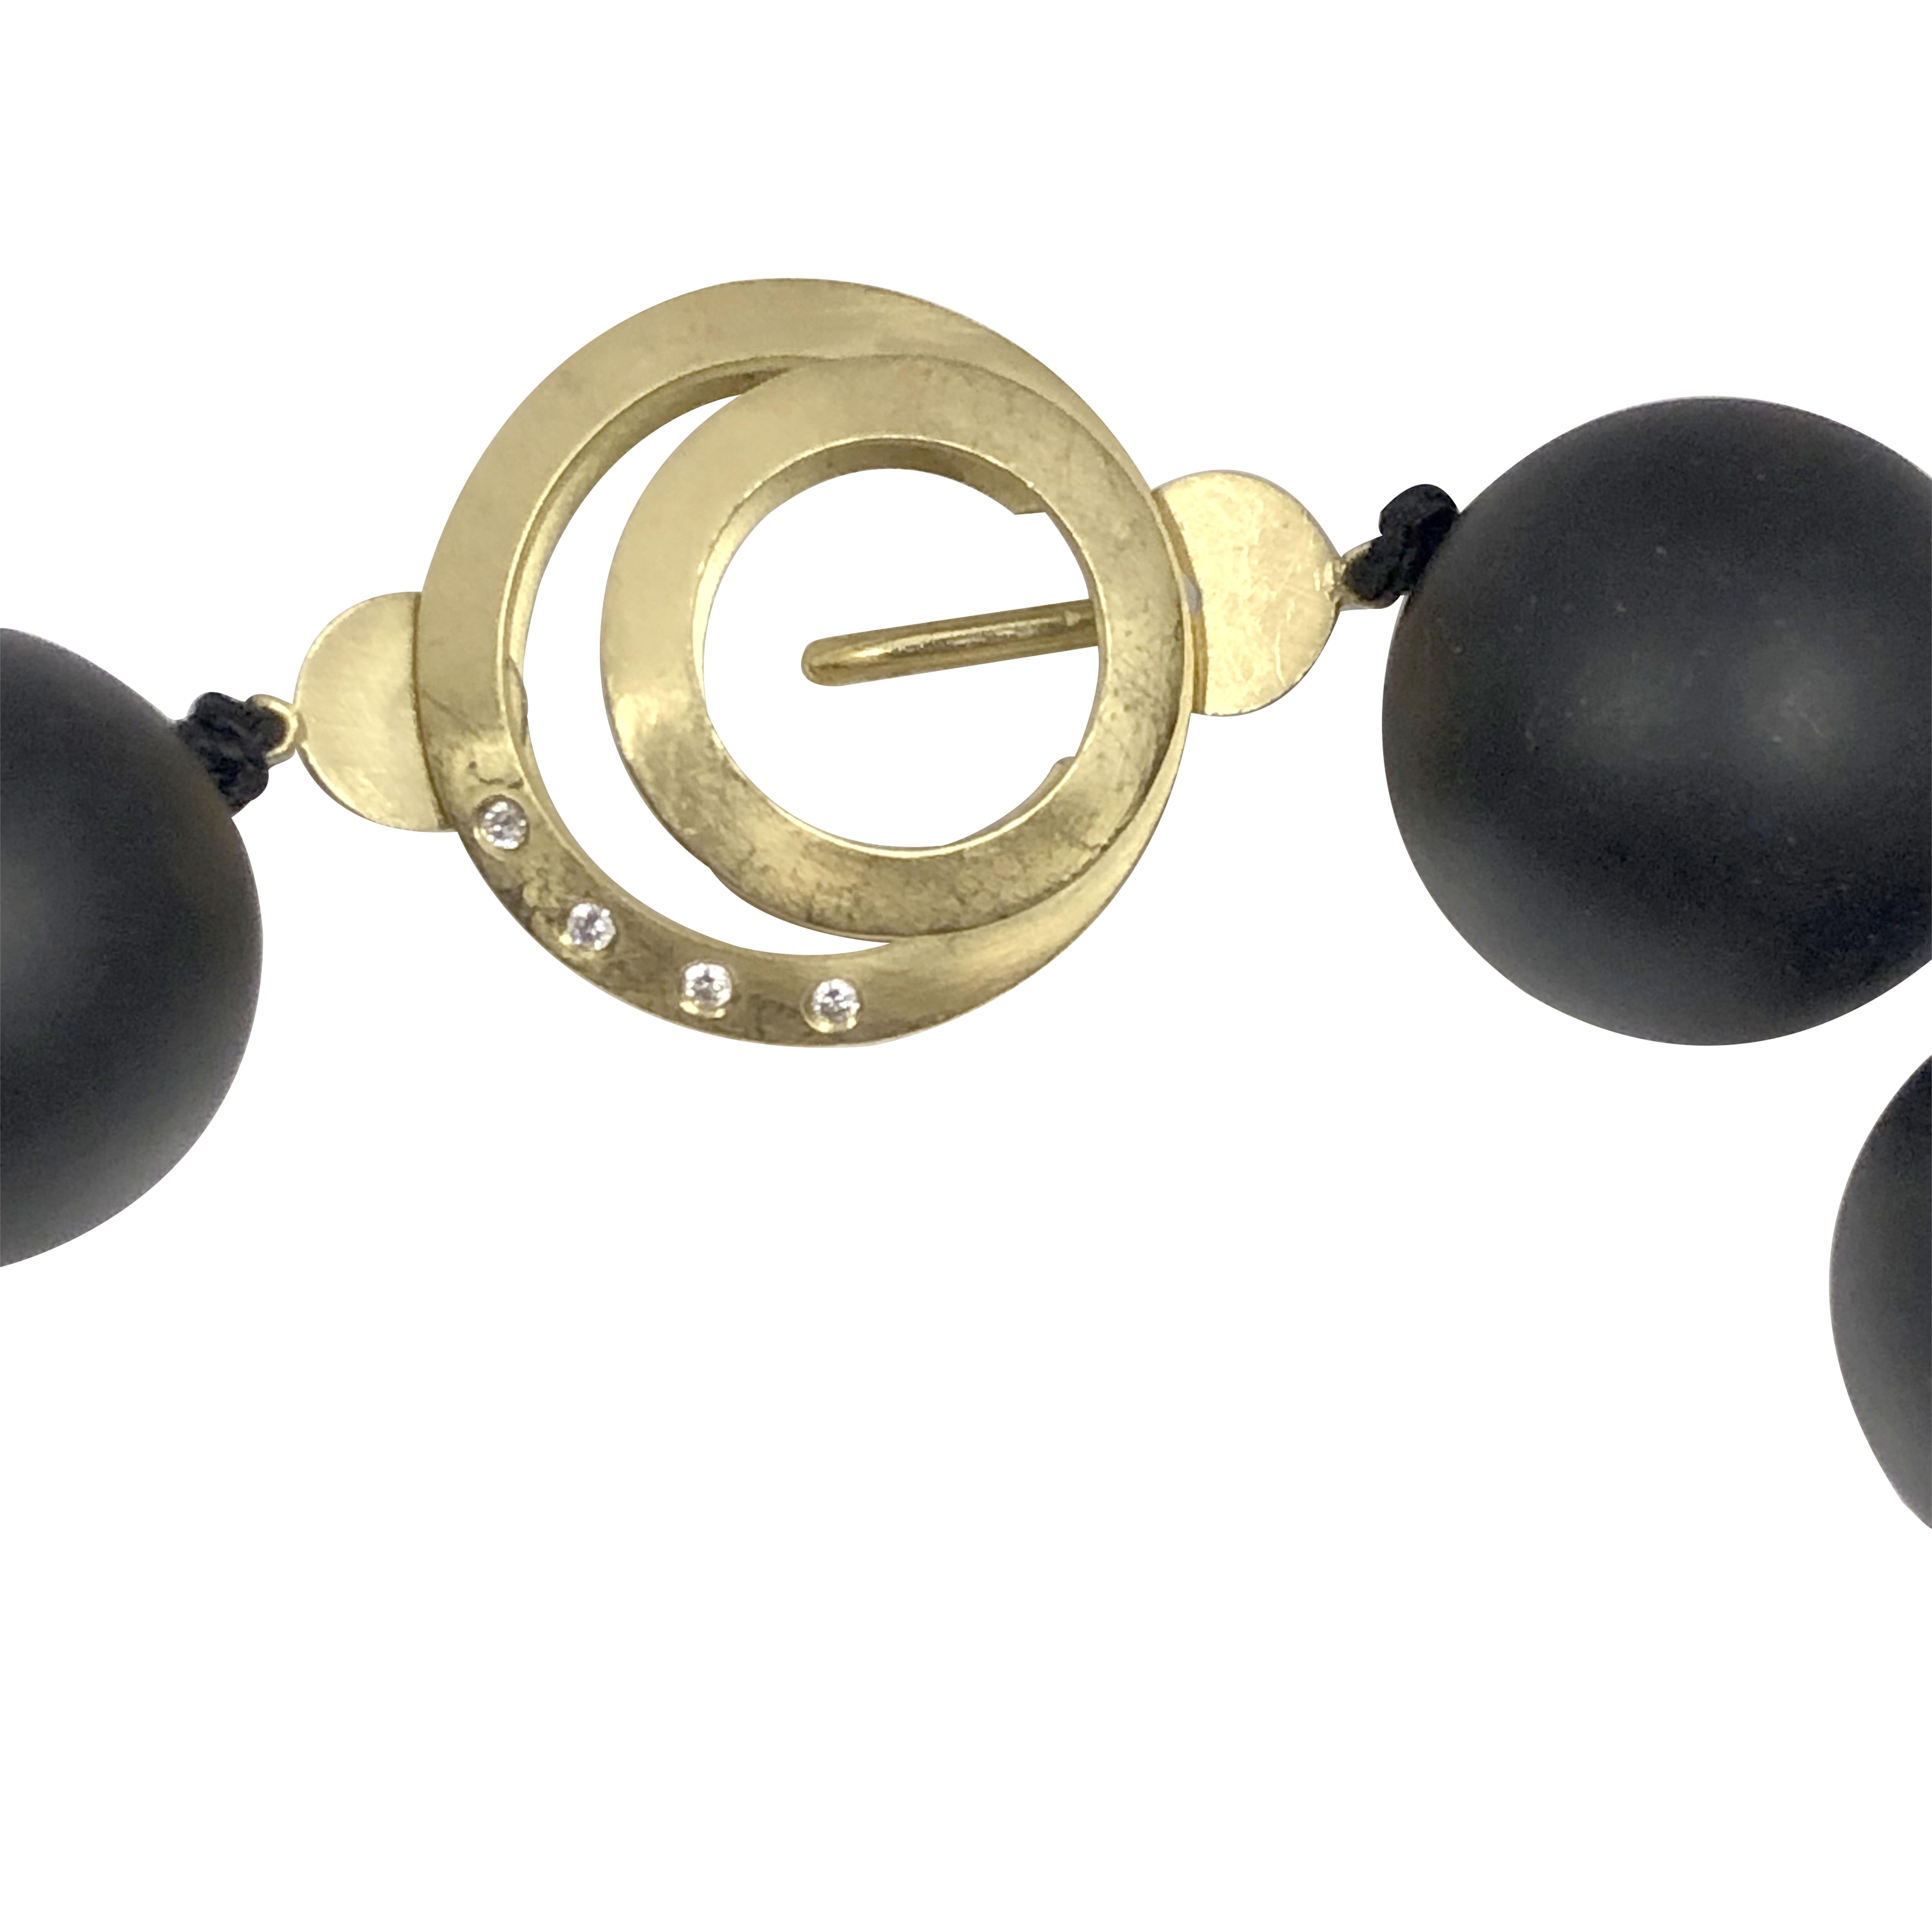 Circa 2015 Ena Necklace, consisting of 20 M.M. ( 3/4 inch diameter ) Lightly frosted Black Onyx Beads, 1 inch Diameter 18K Yellow Gold solid and Heavy Swirl Clasp set with 4 Round Brilliant cut Diamonds. Necklace length 19 1/2 inches.